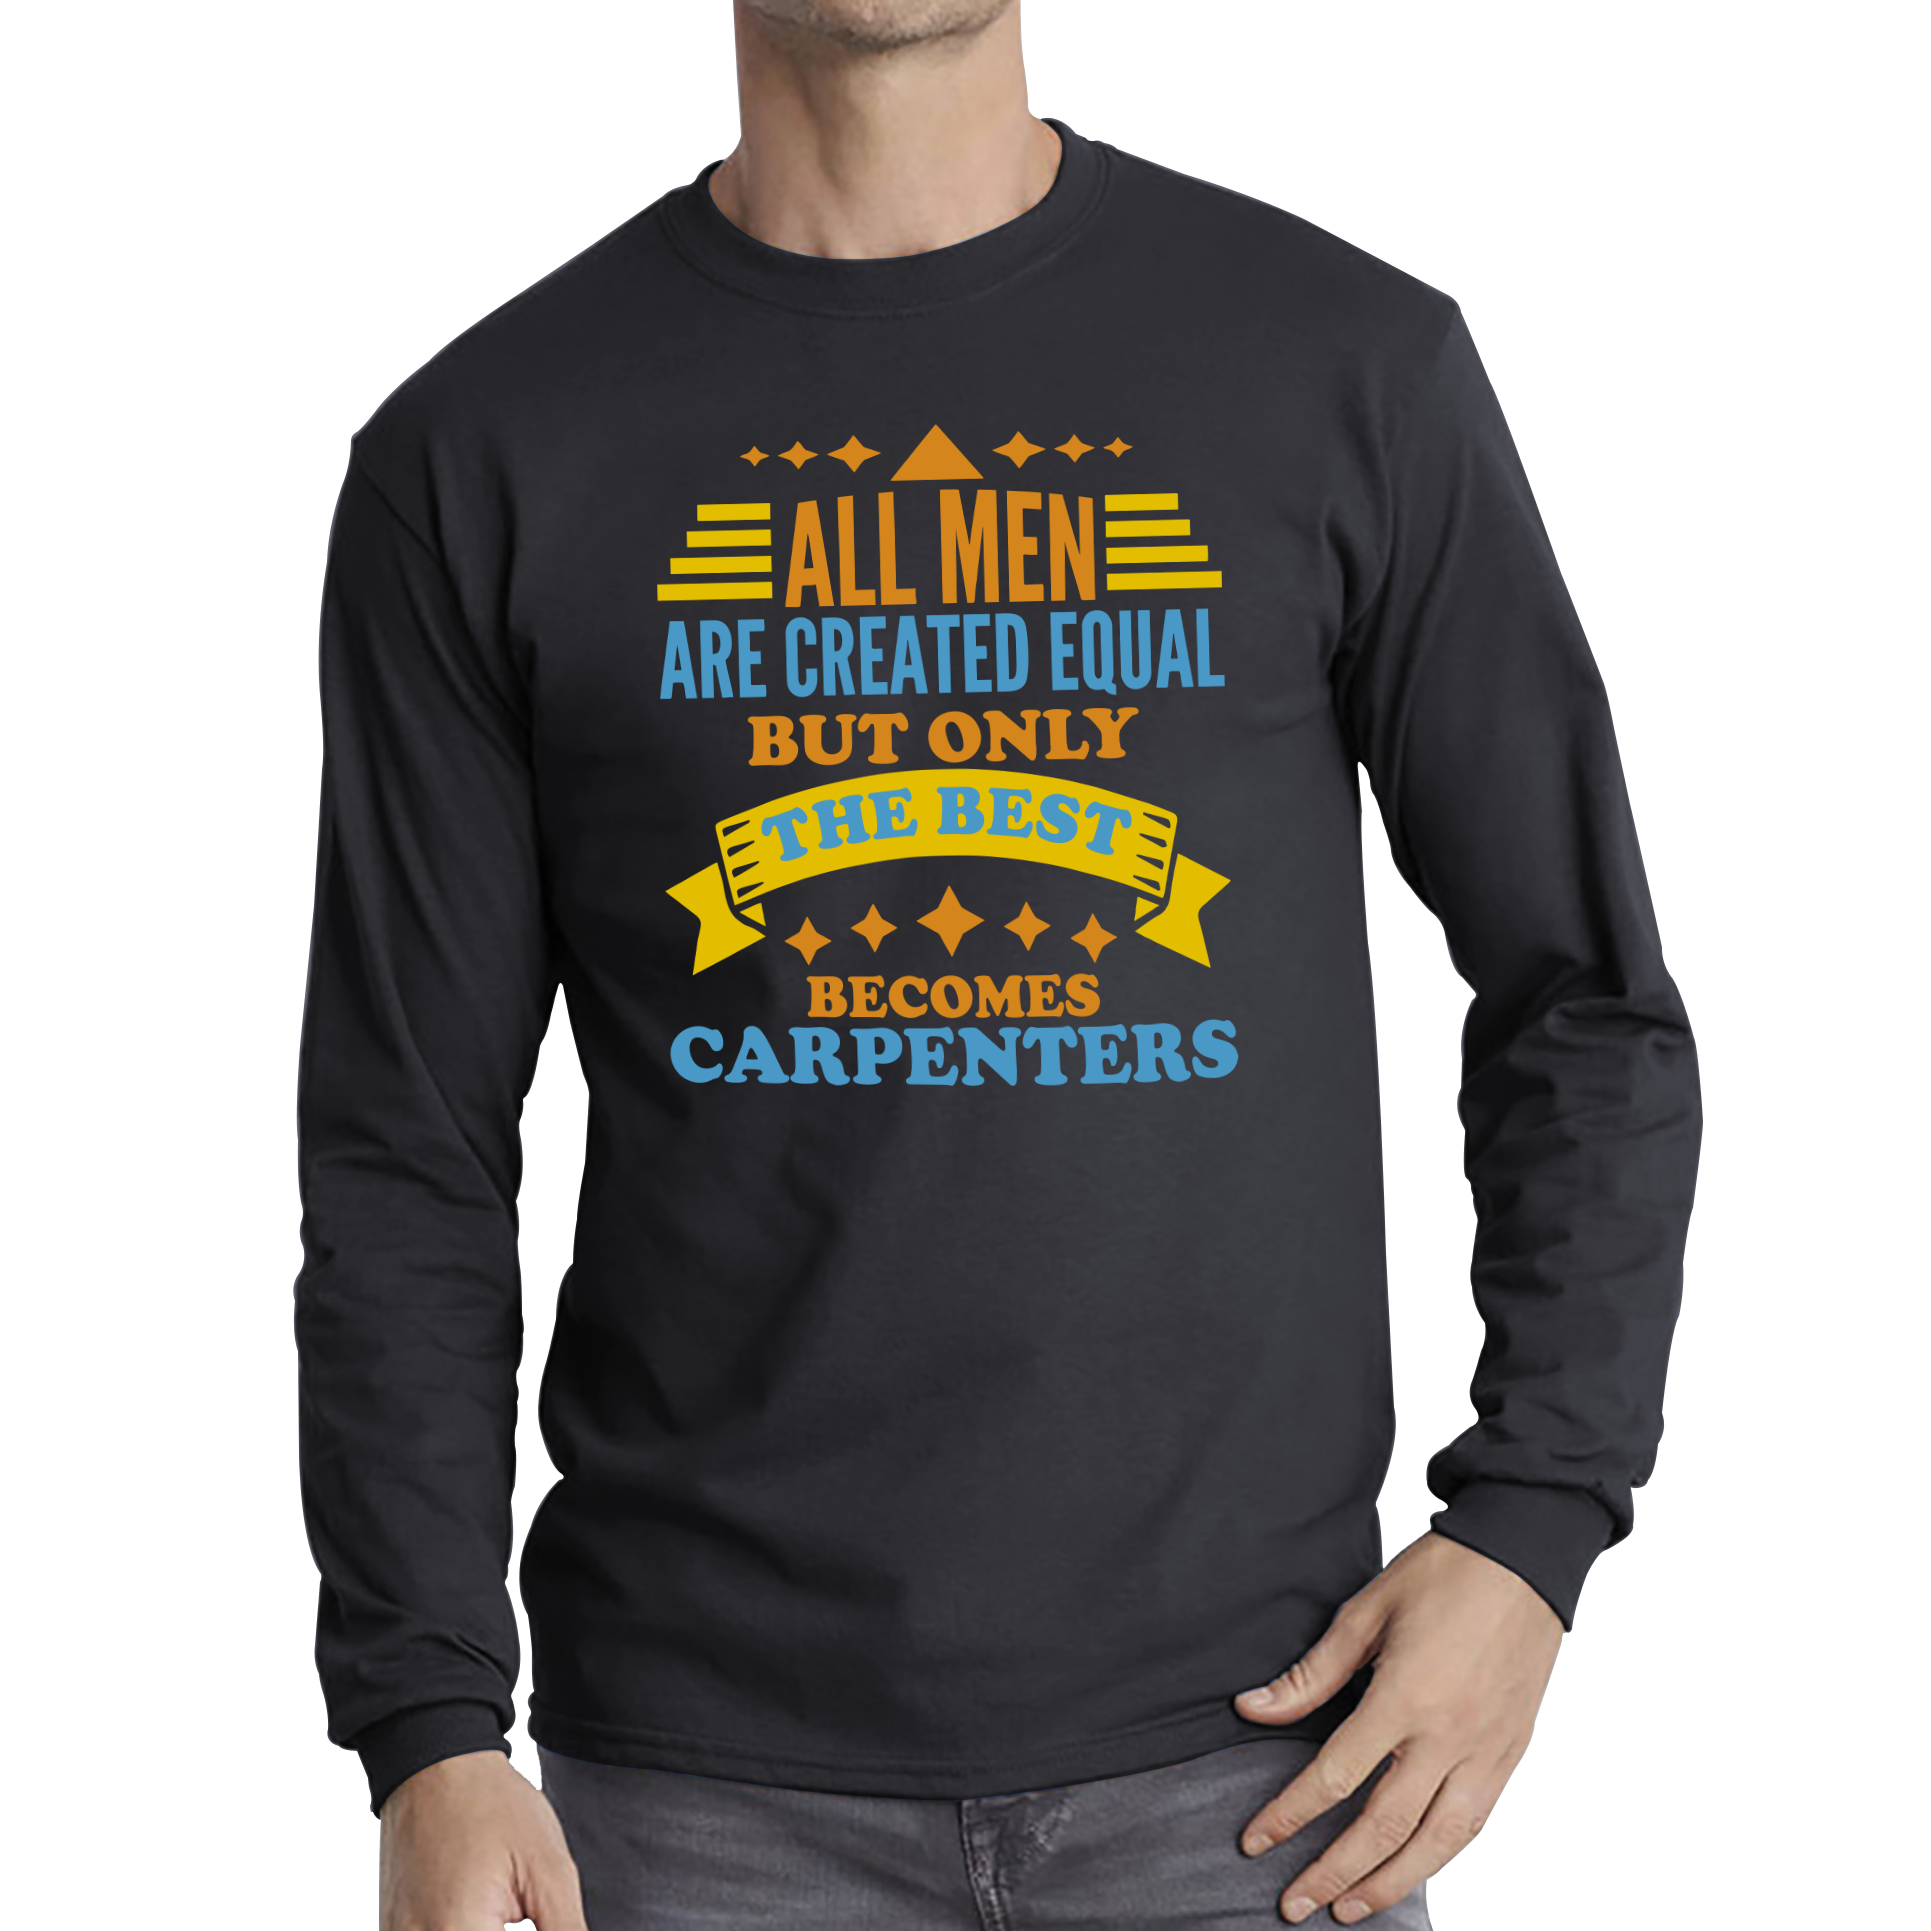 All Men Are Created Equal But Only The Best Becomes Carpenters Long Sleeve T Shirt